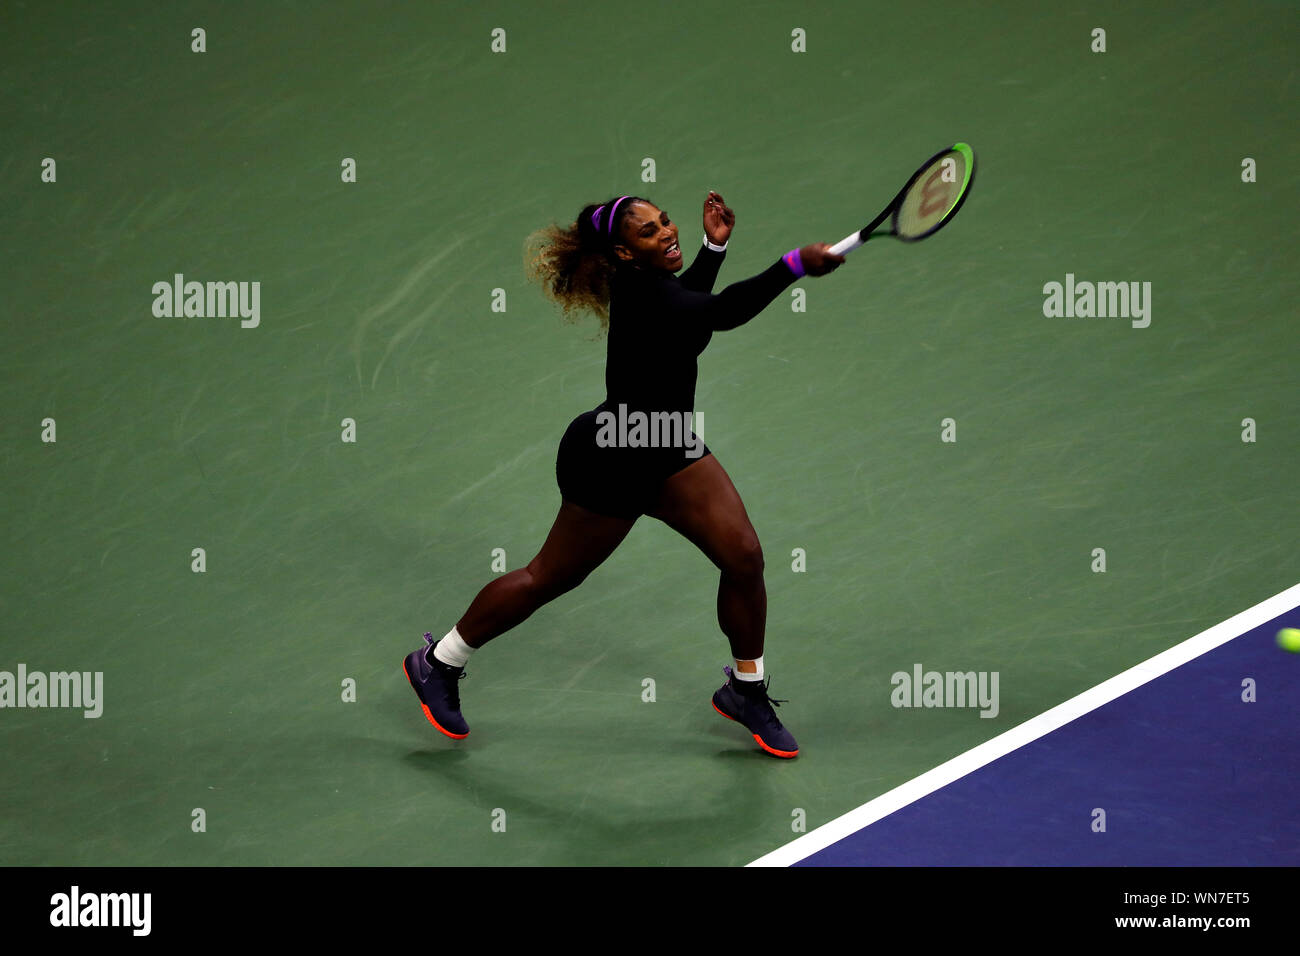 Flushing Meadows, New York, United States - 5 September 2019.  Serena Williams in action against Elina Svitolina of Ukraine at the US Open in Flushing Meadows, New York.  Williams will face Canada's Bianca Andreescu in Saturday's final Credit: Adam Stoltman/Alamy Live News Stock Photo